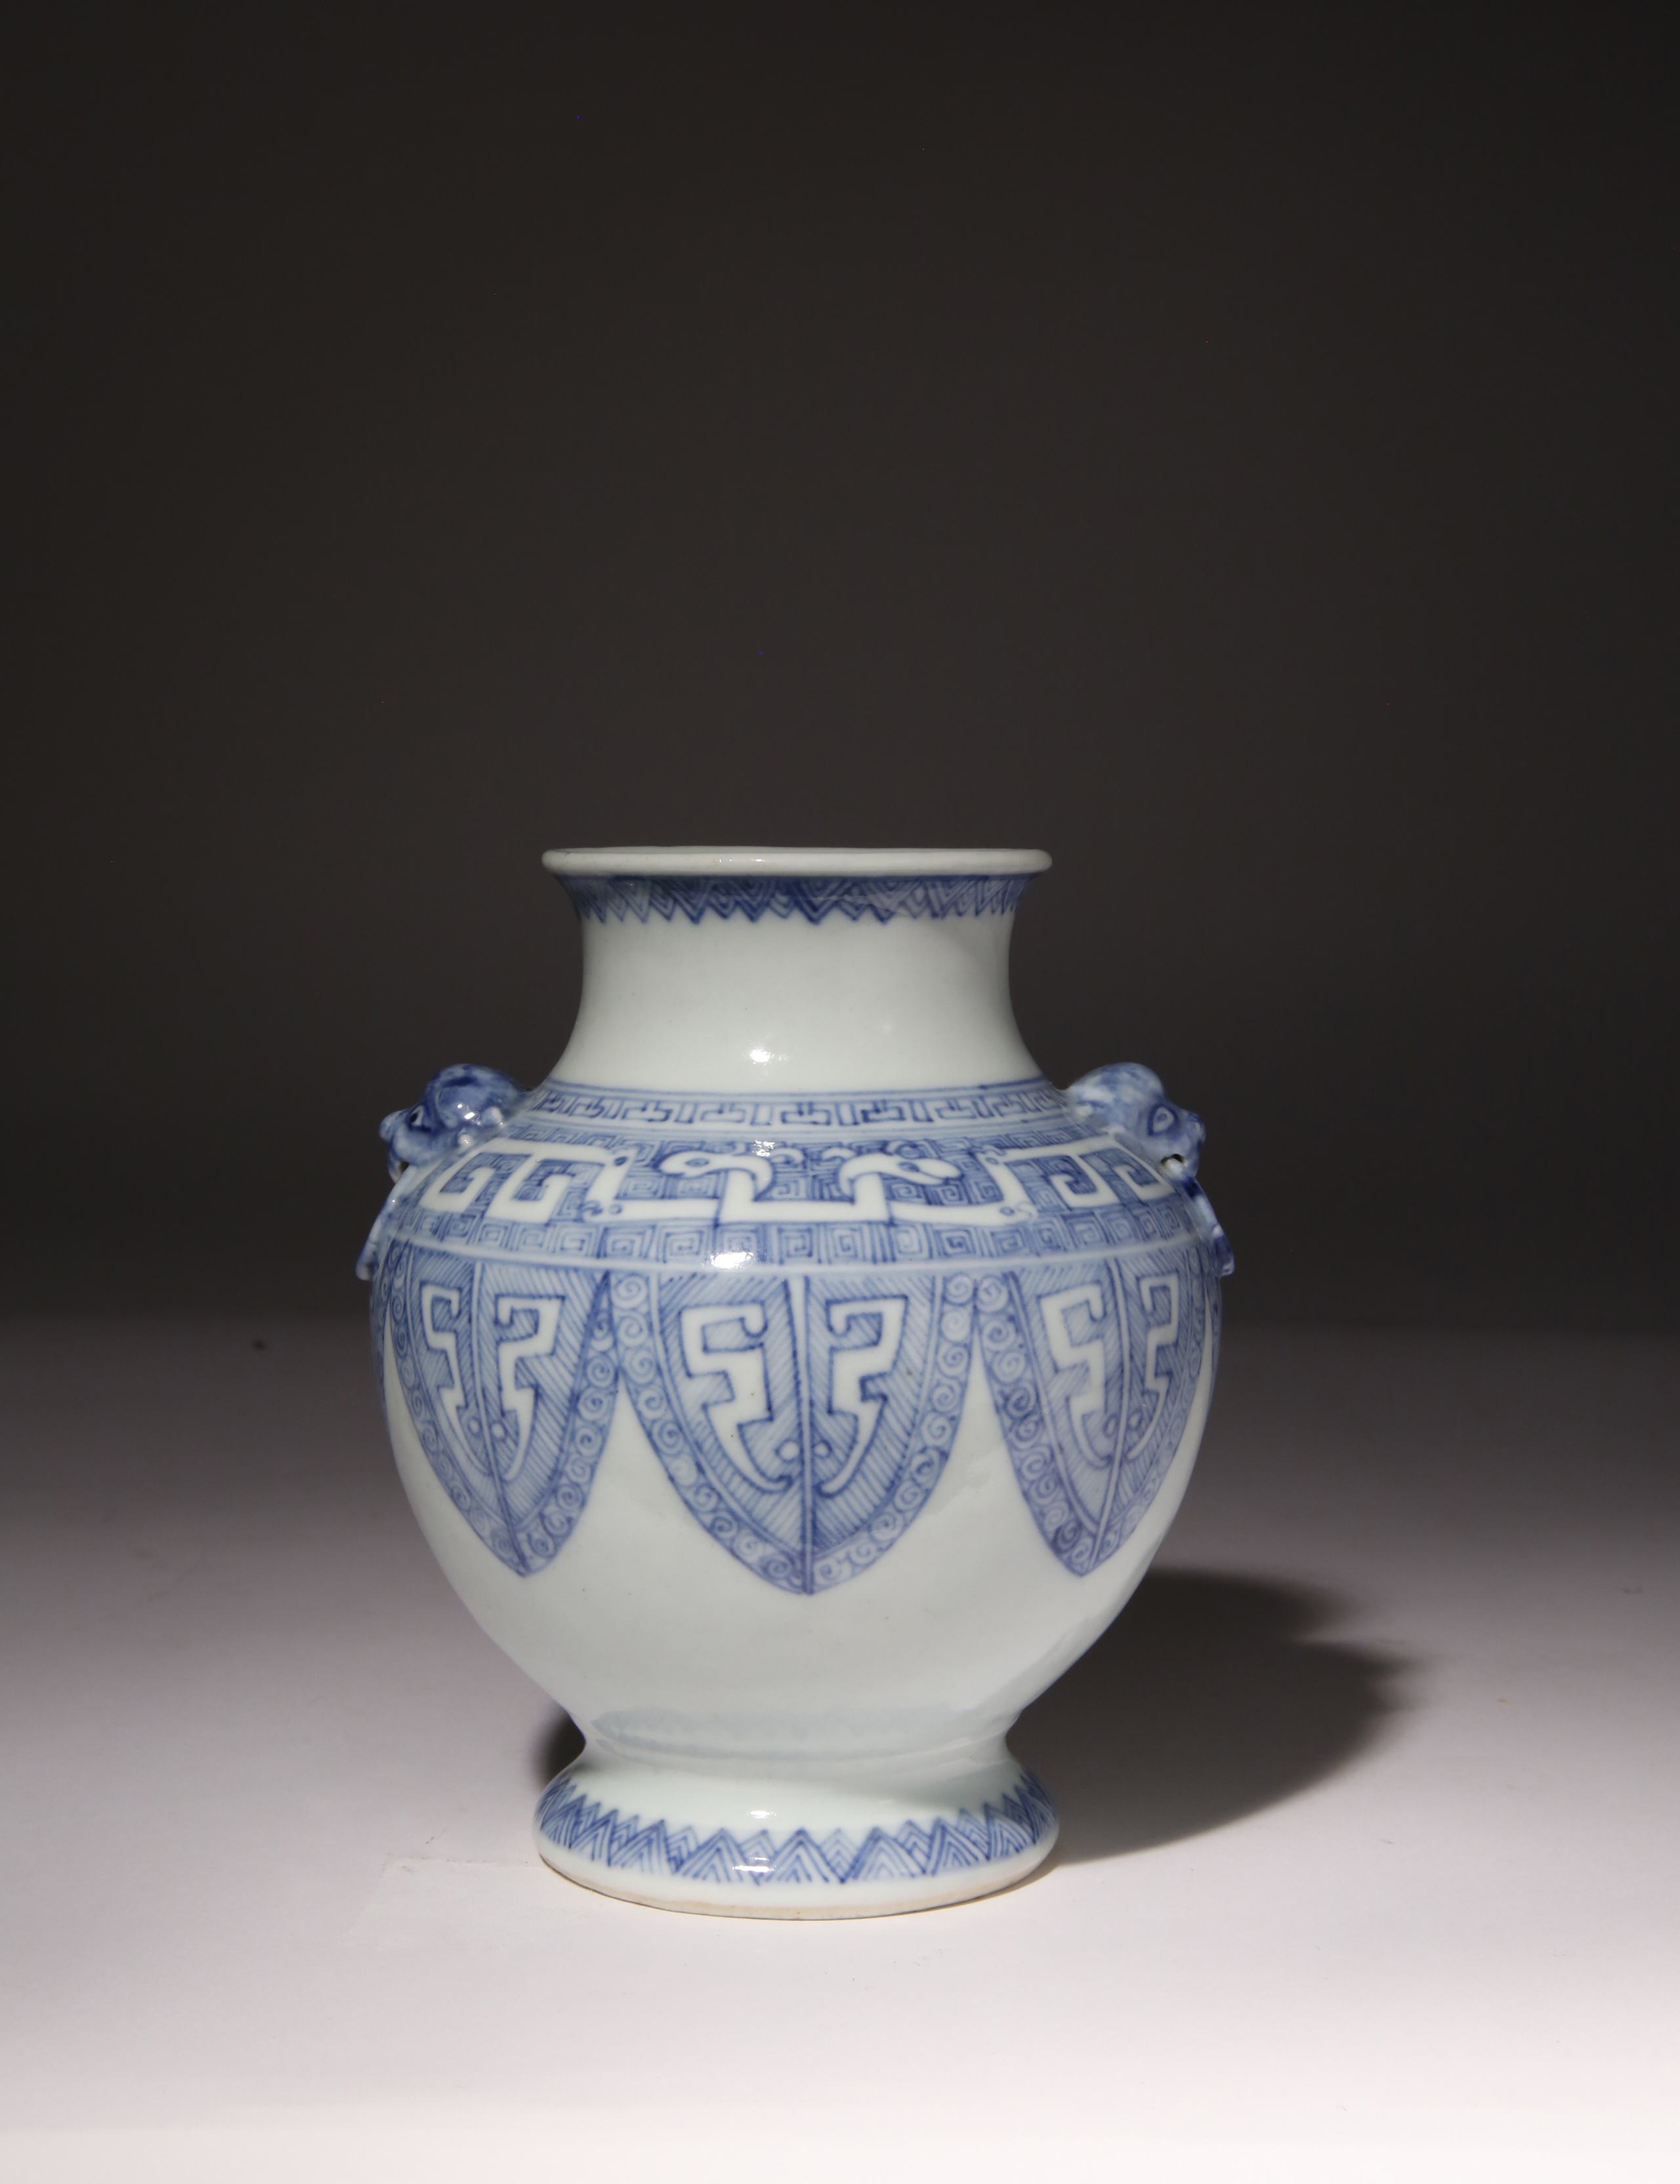 A CHINESE BLUE AND WHITE ARCHAISTIC VASE 18TH CENTURY Decorated with bands of overlapping stylised